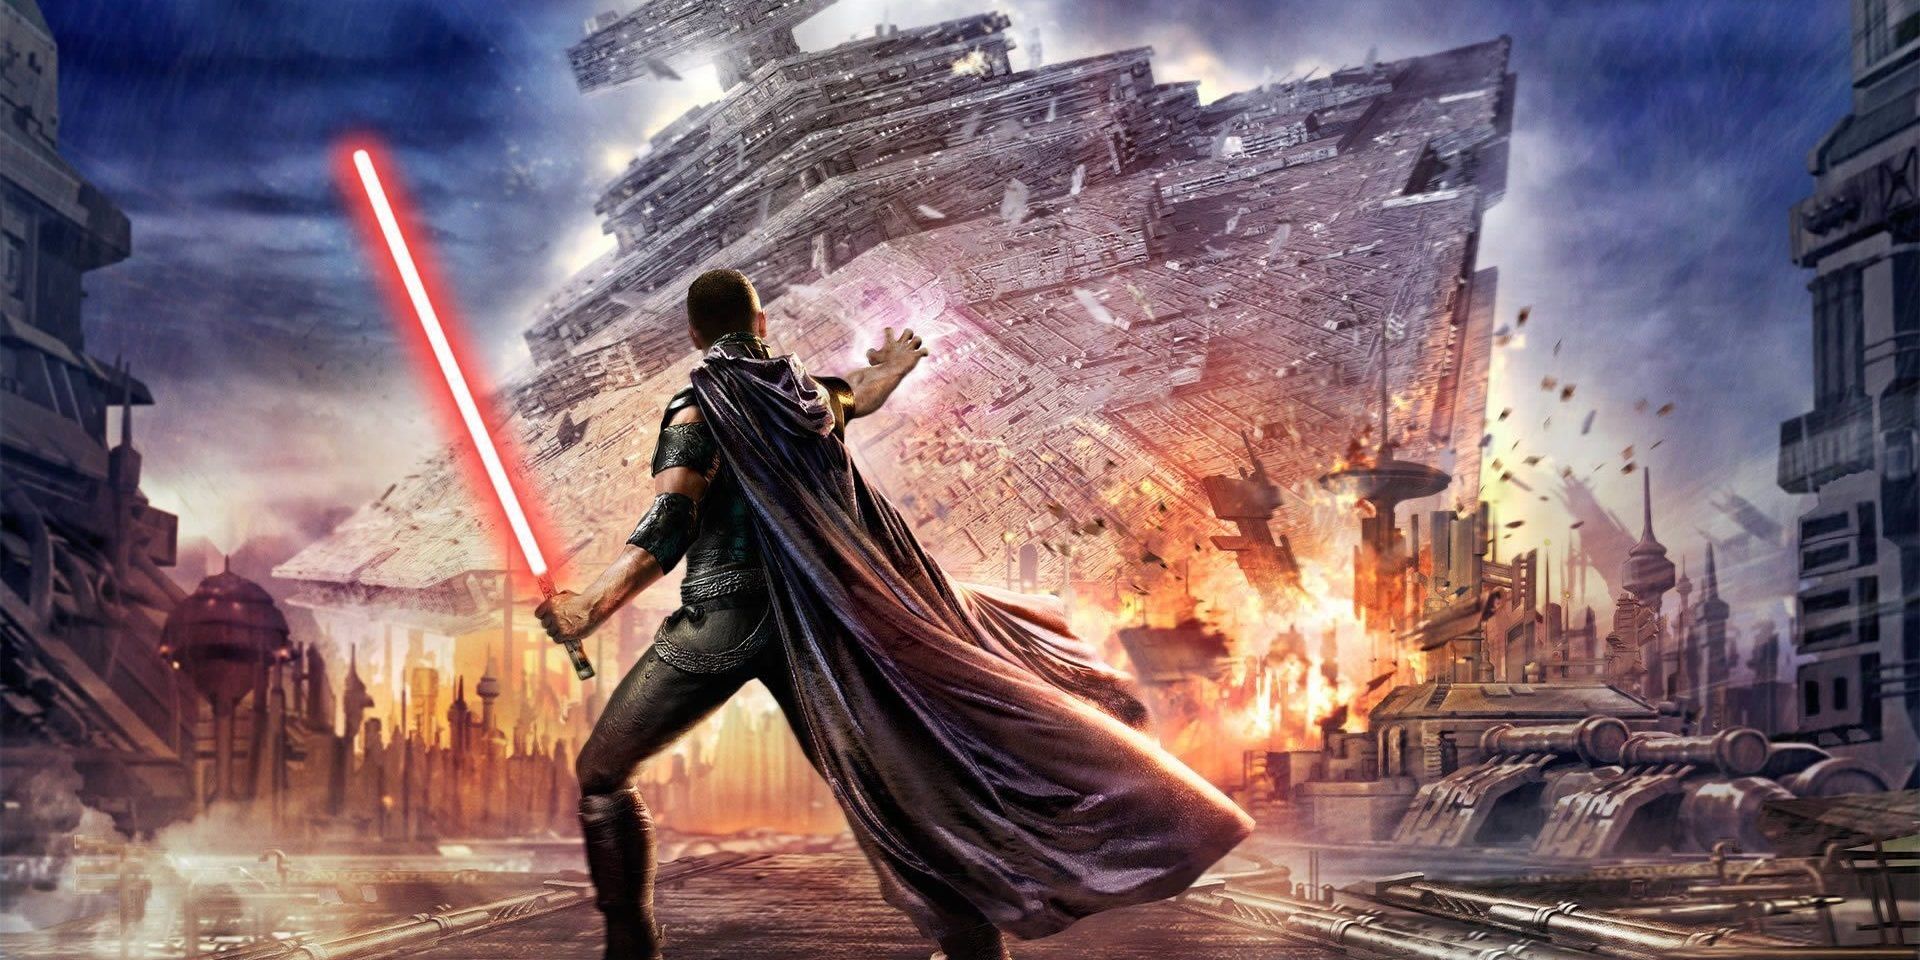 Starkiller was so powerful with the Force that he could bring down a Star Destroyer. 